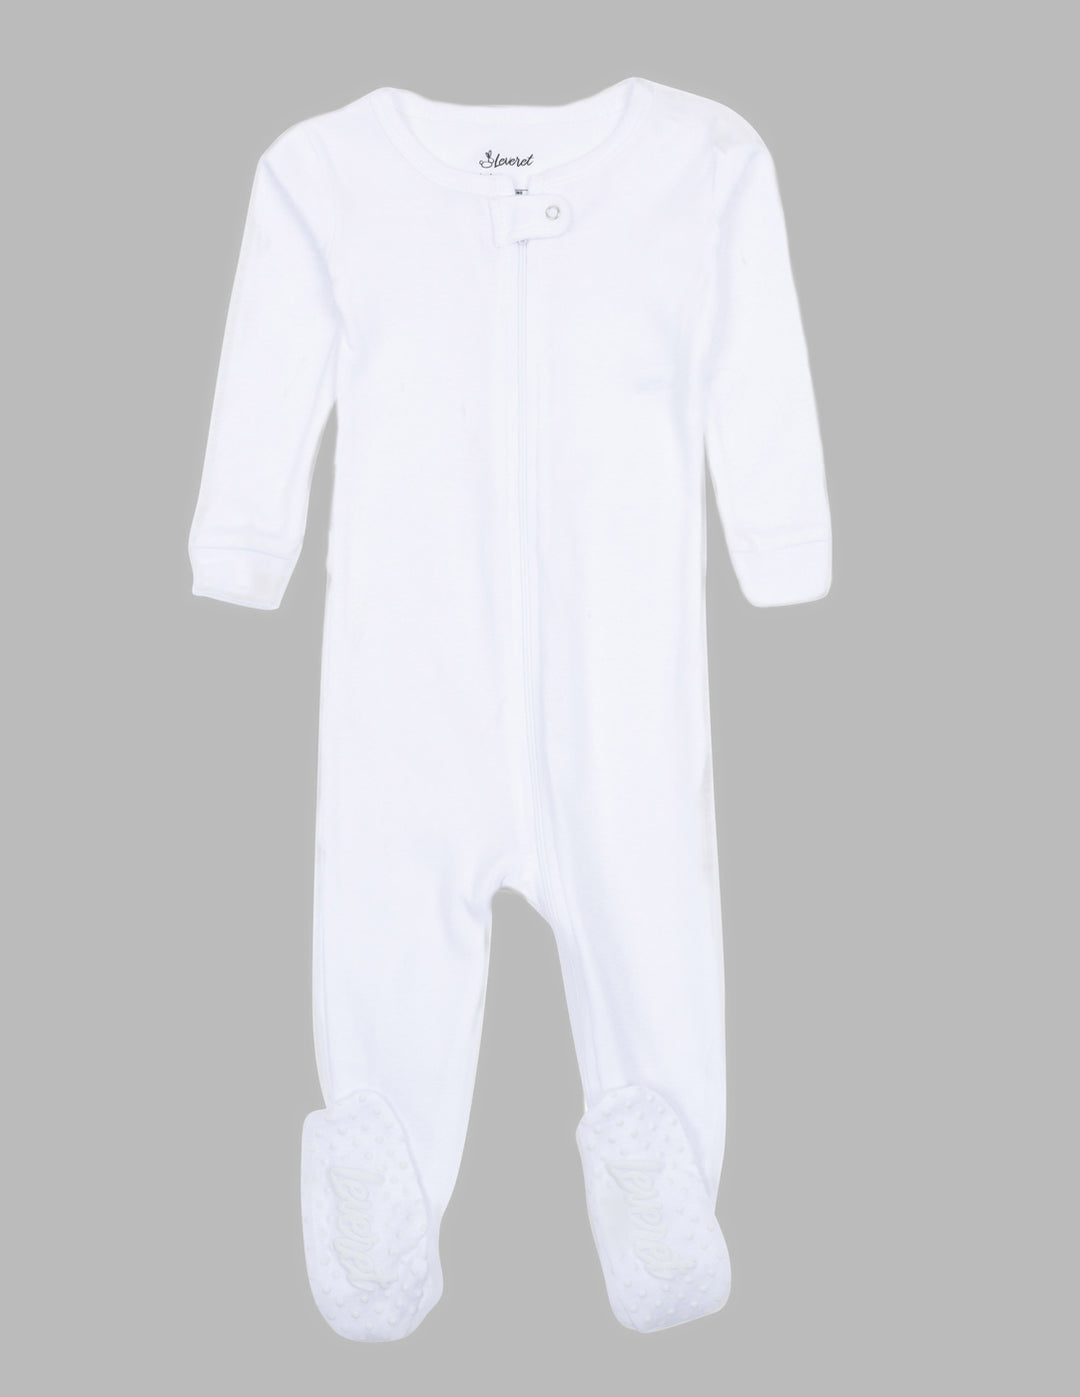 solid color white baby footed pajamas